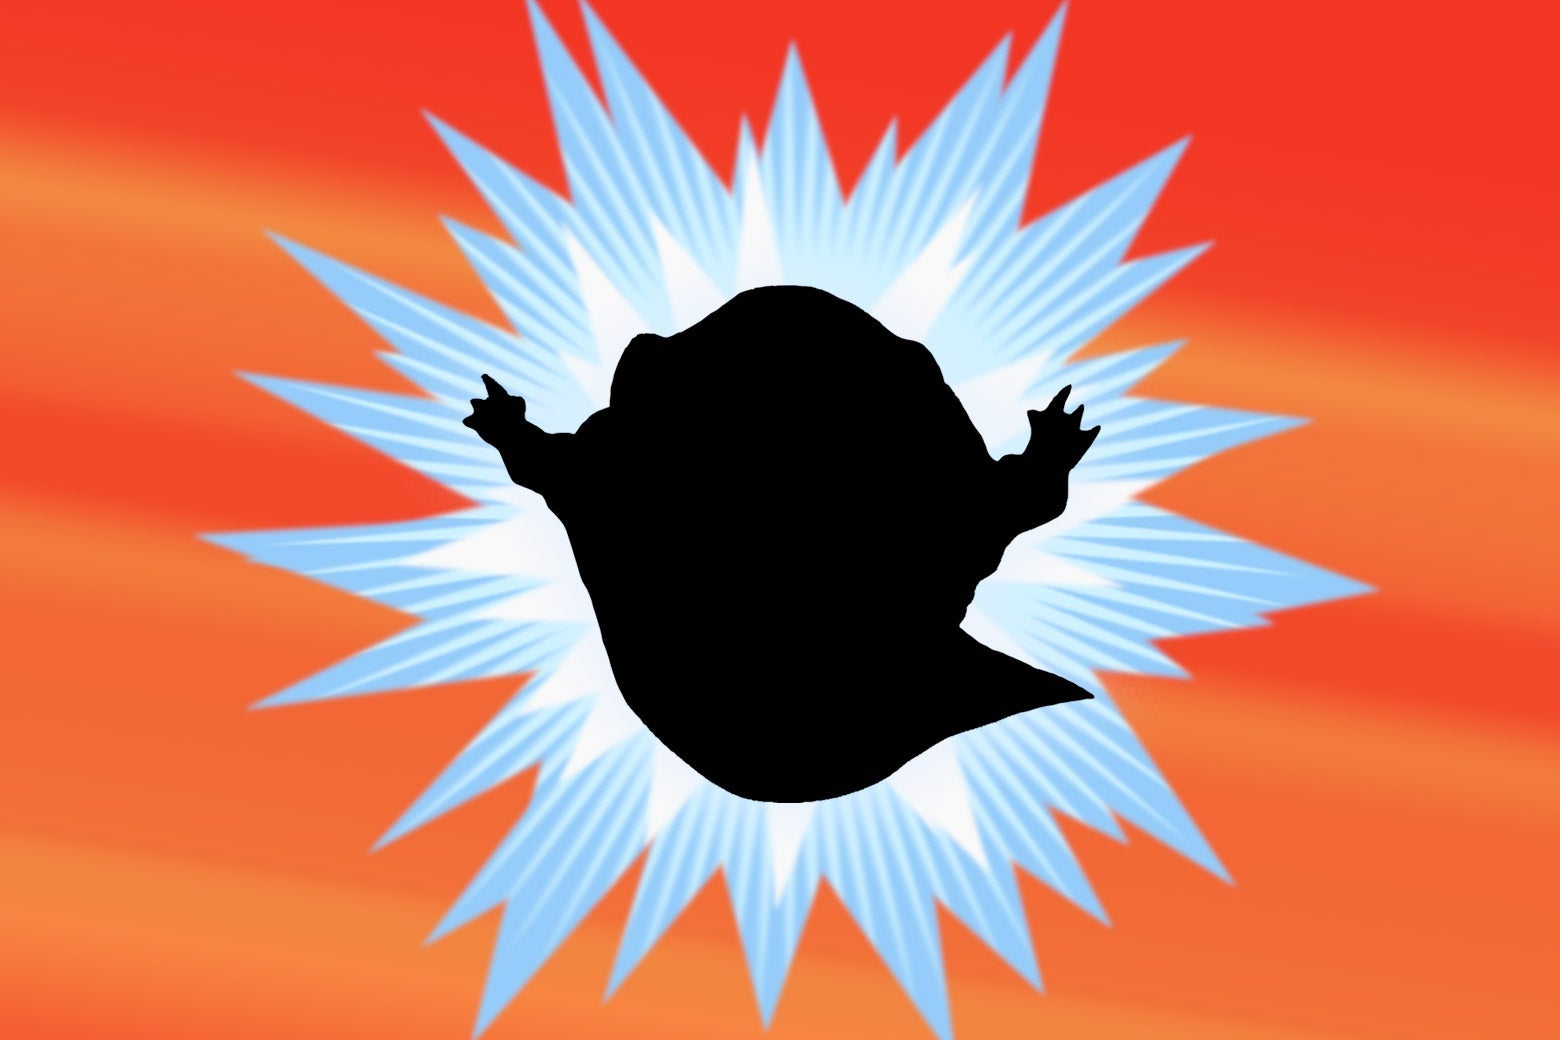 Silhouette of a monster from Star Wars on top of an orange and blue background.